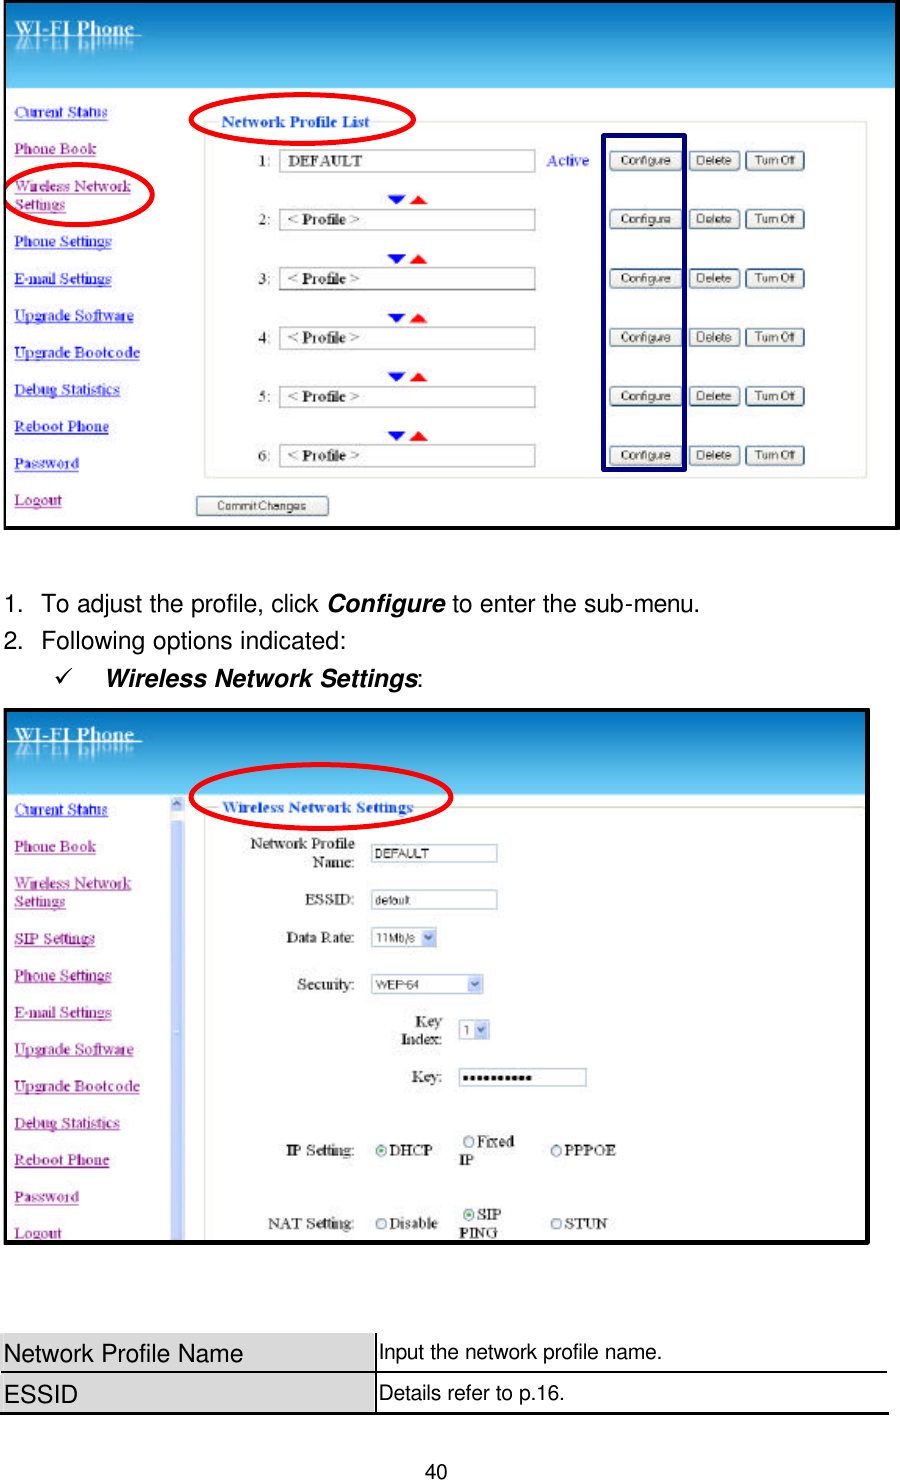  40  1. To adjust the profile, click Configure to enter the sub-menu. 2. Following options indicated: ü Wireless Network Settings:   Network Profile Name Input the network profile name. ESSID Details refer to p.16. 